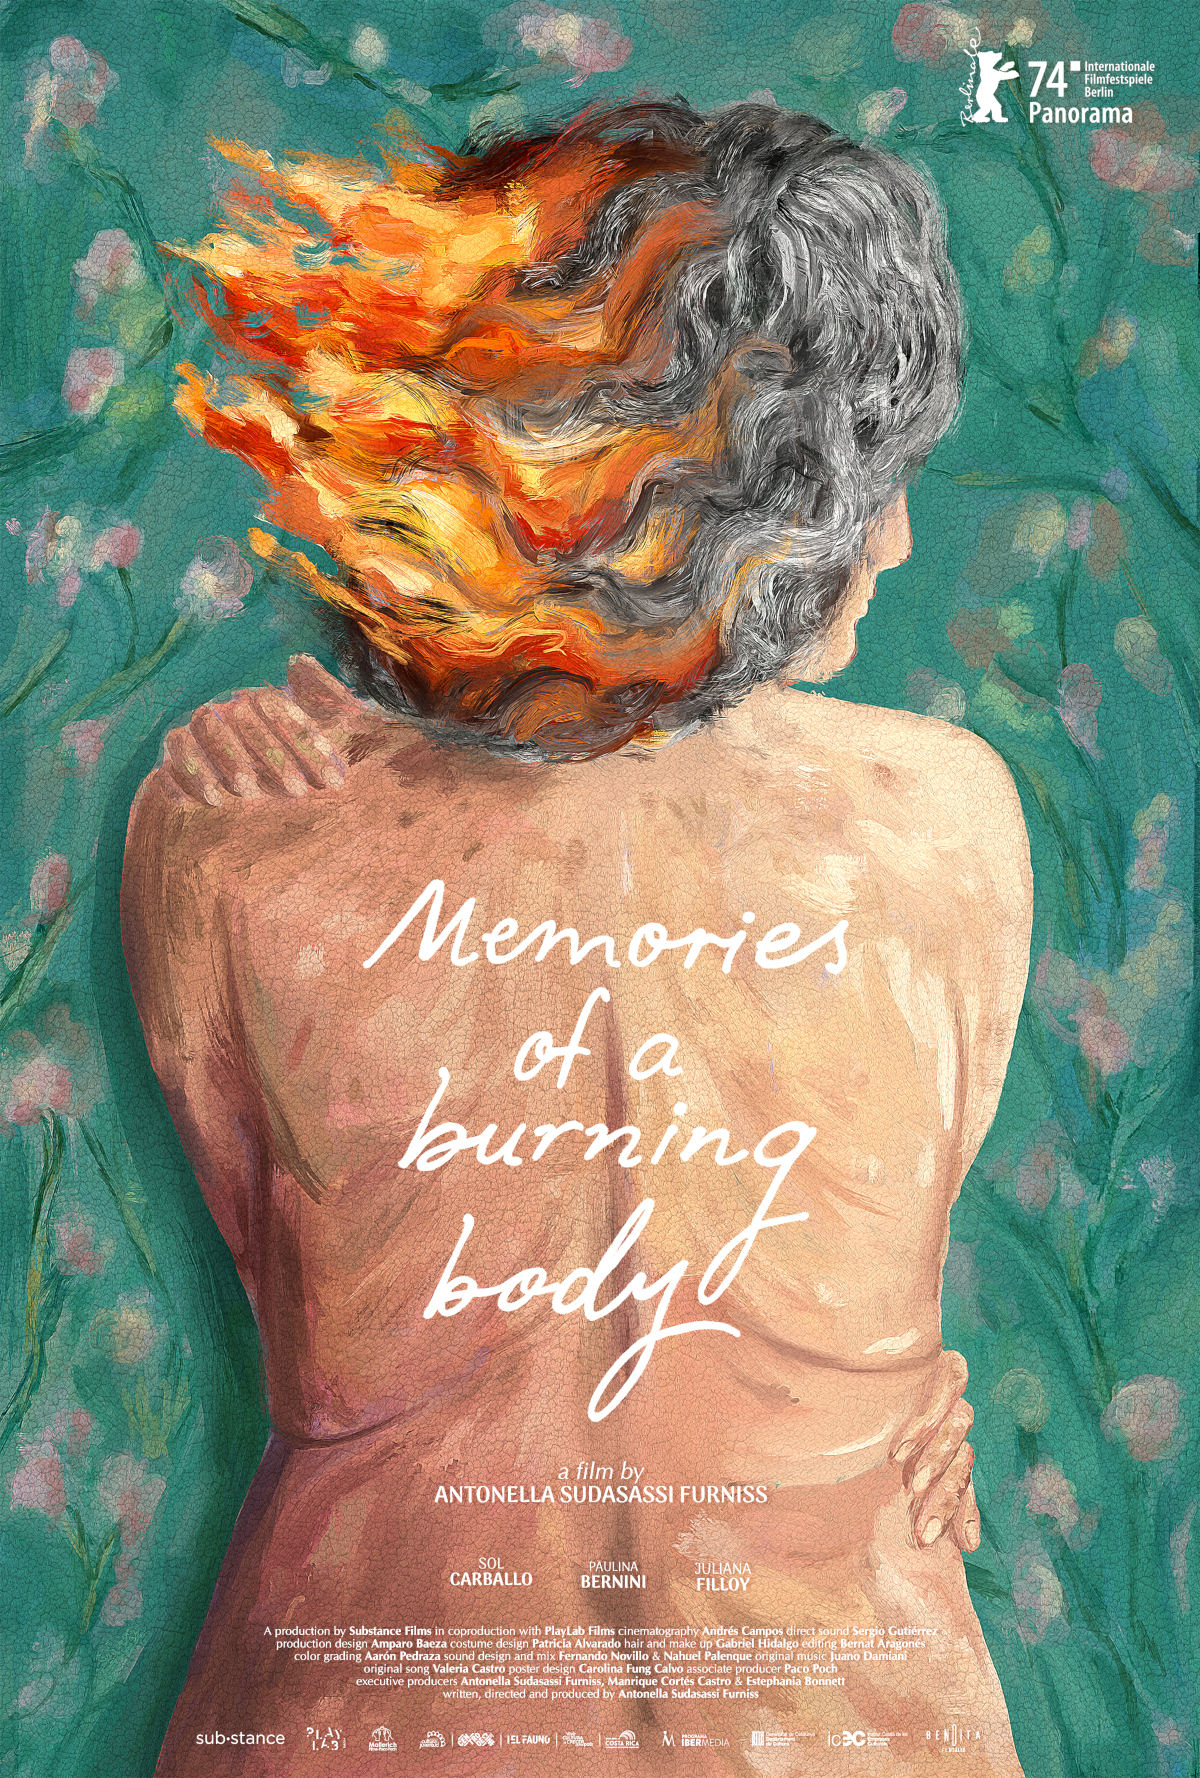 MEMORIES OF A BURNING BODY + by Antonella Sudasassi Furniss